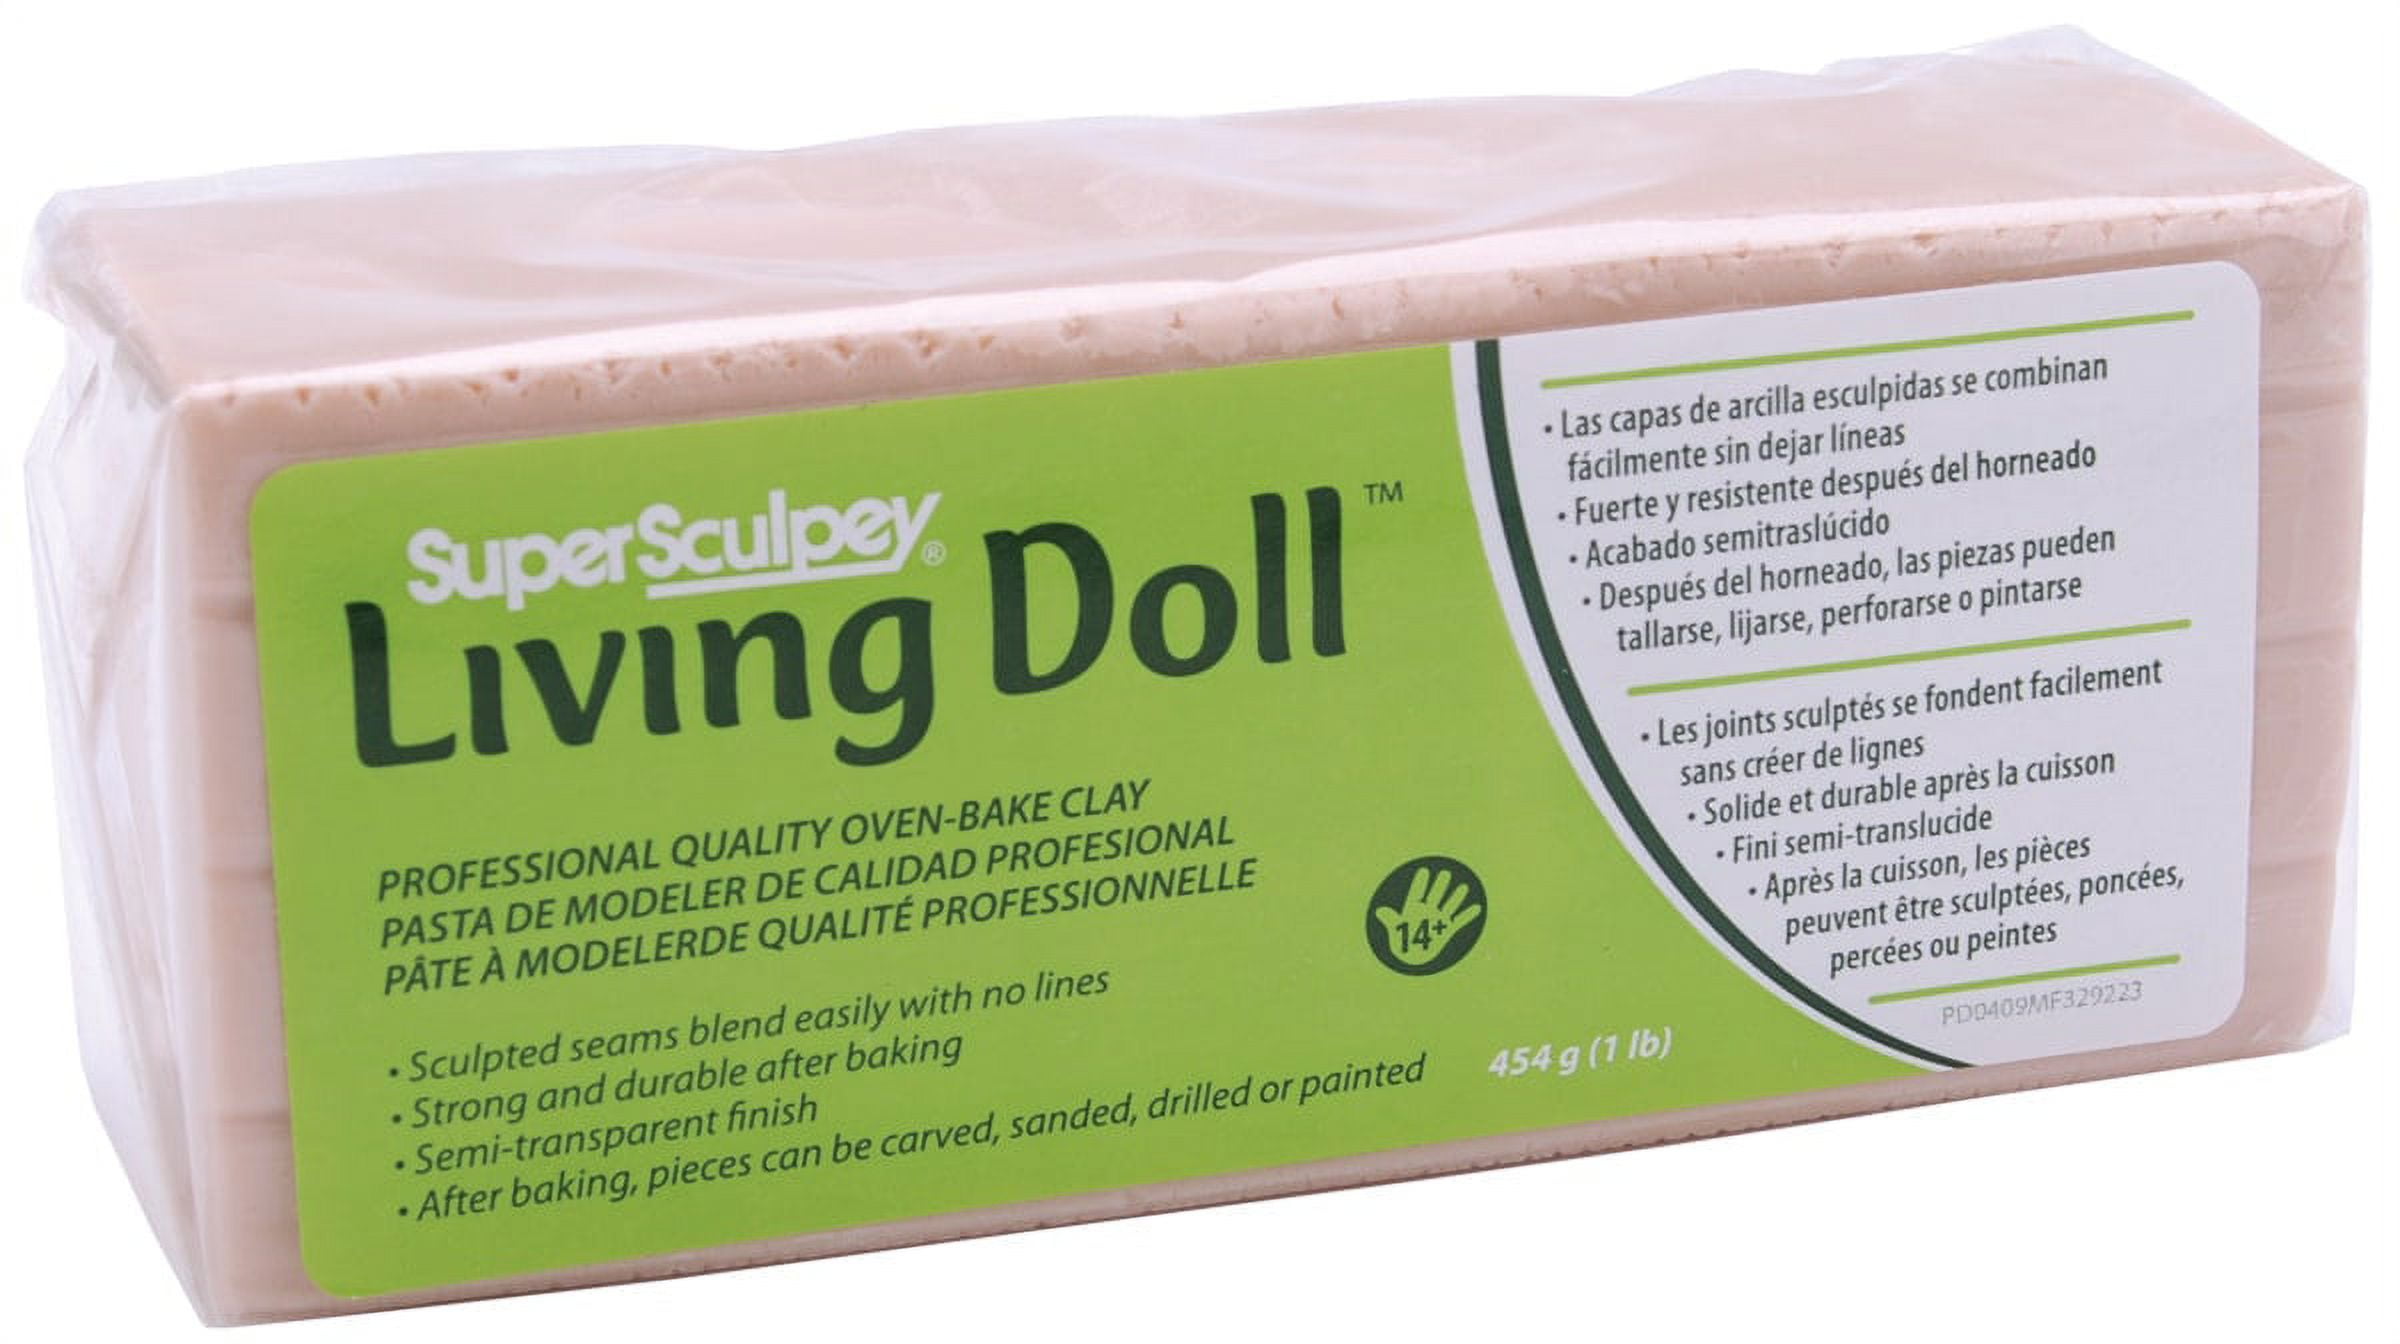 Super Sculpey Living Doll Beige, Premium, Non Toxic, Soft, Sculpting  Modeling Polymer, Oven Bake Clay, 1 pound bar. Great for all advanced  sculptors, artists and doll makers